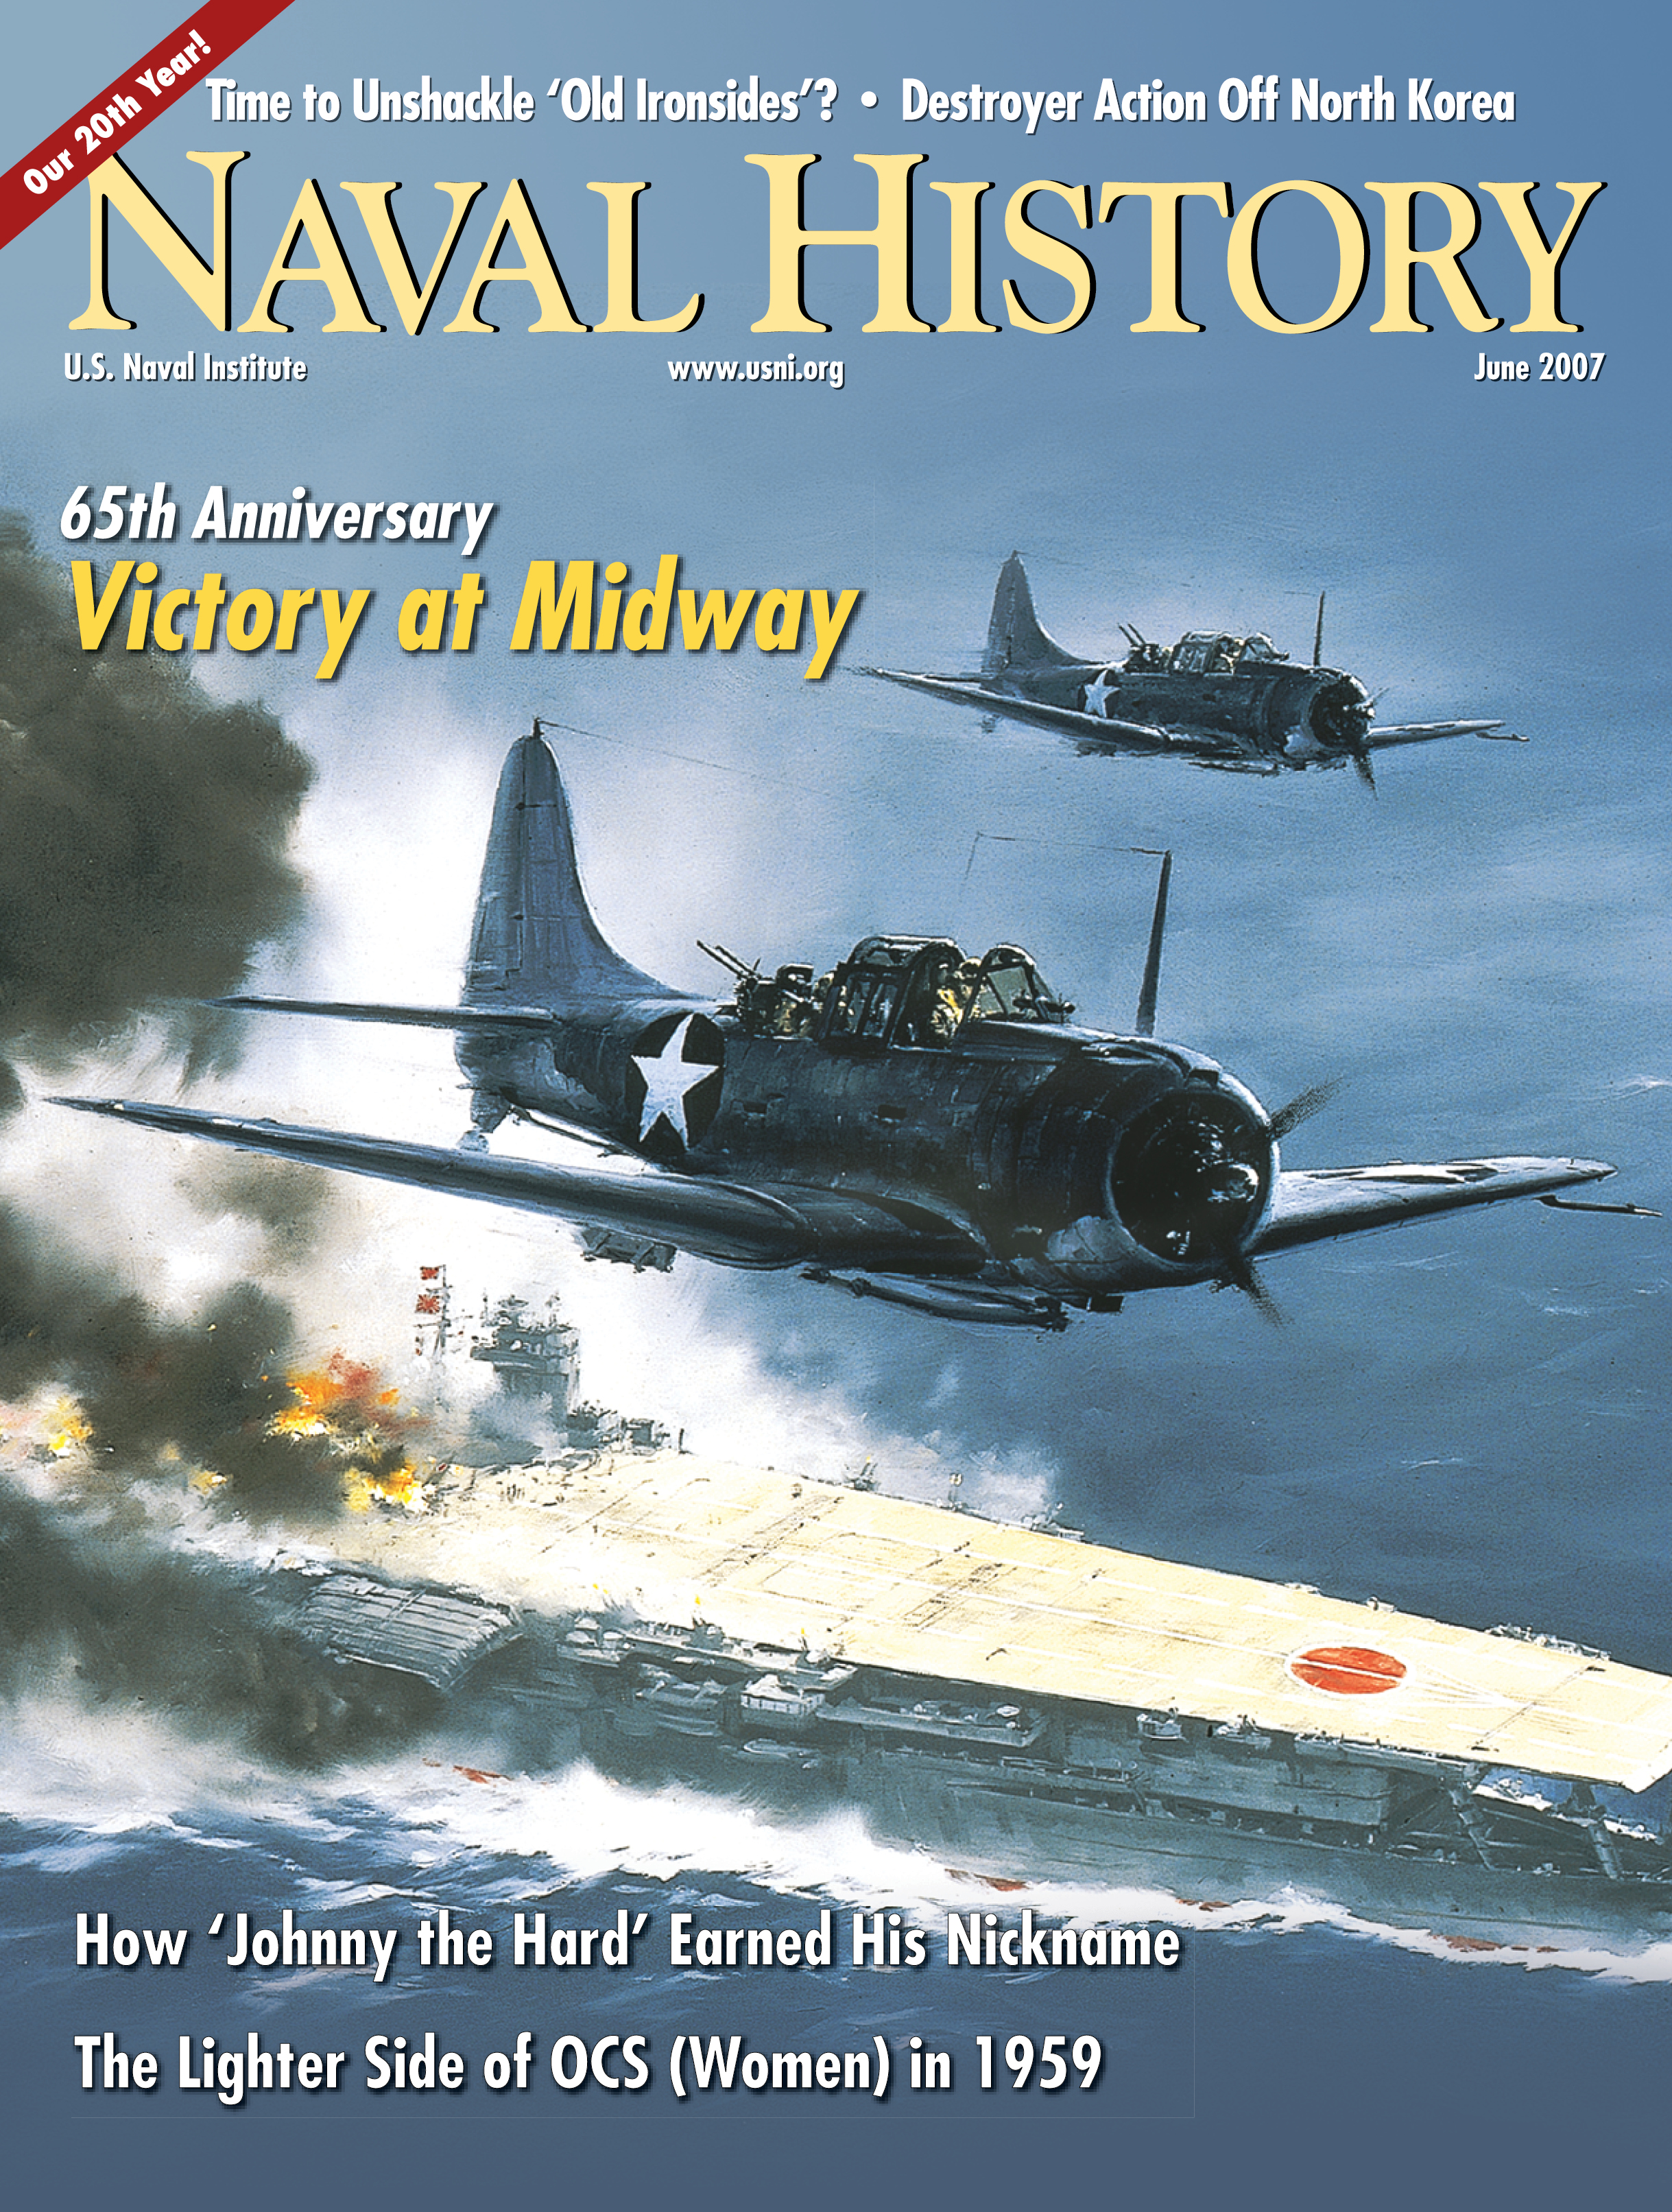 U.S. Navy SBD Dauntlesses fly over the burning Akagi in R. G. Smith’s painting The Battle of Midway